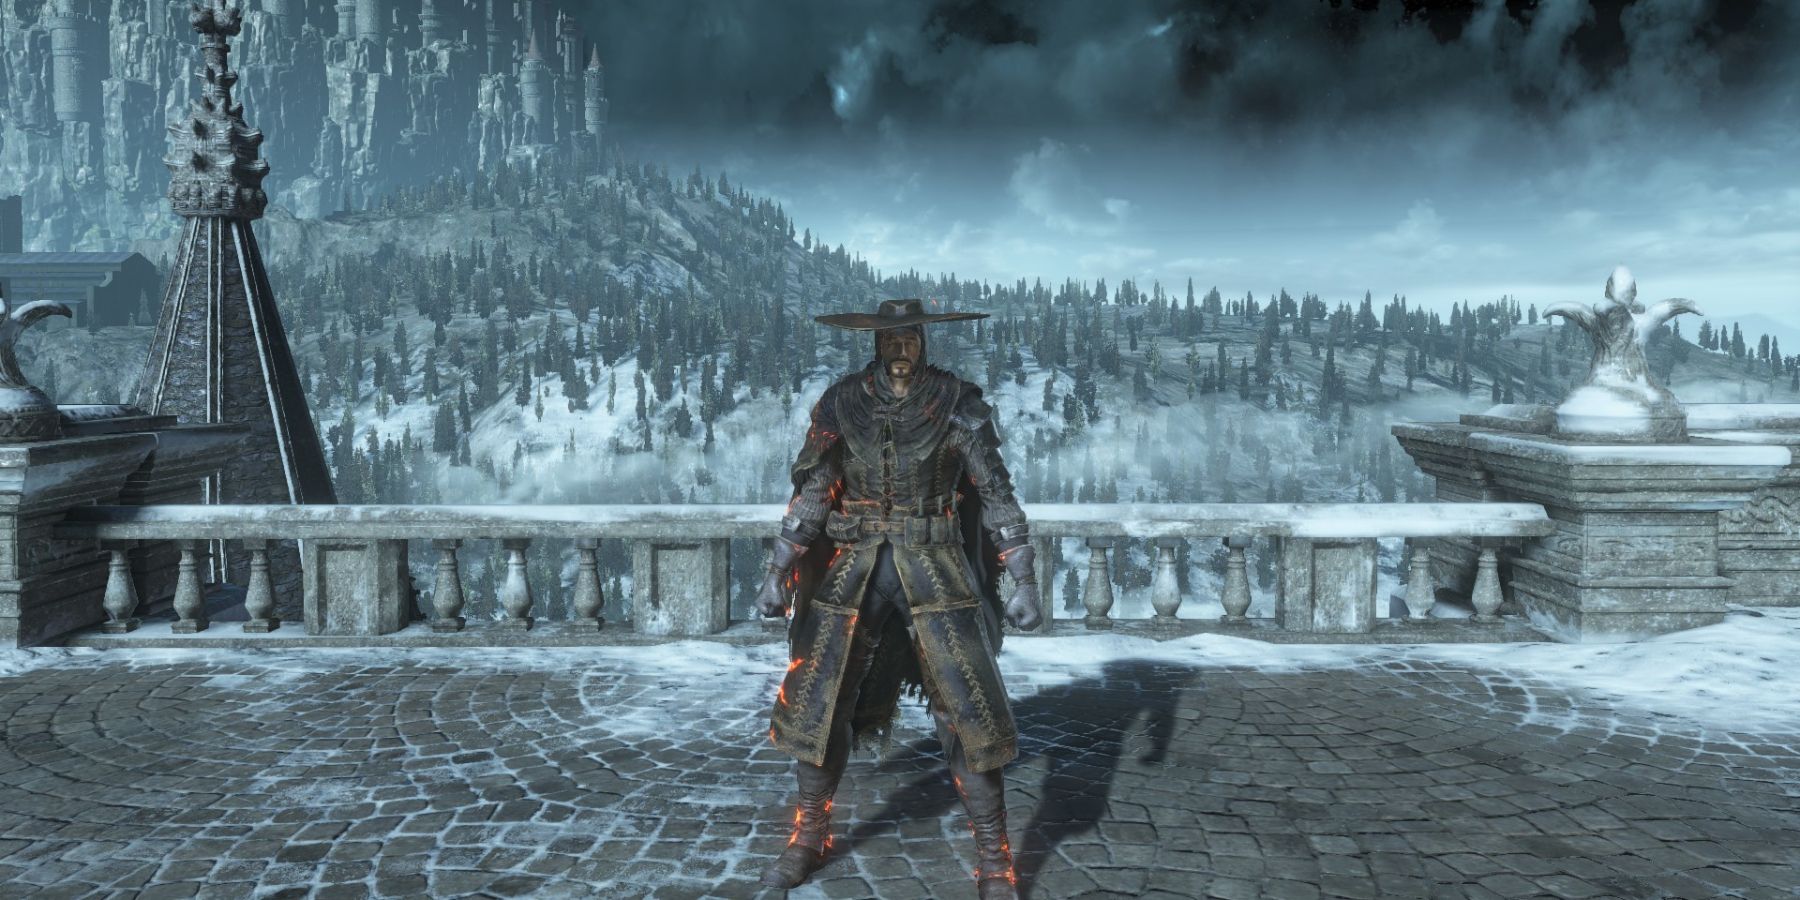 The player is wearing the Black Hand set in Irithyll in Dark Souls 3.